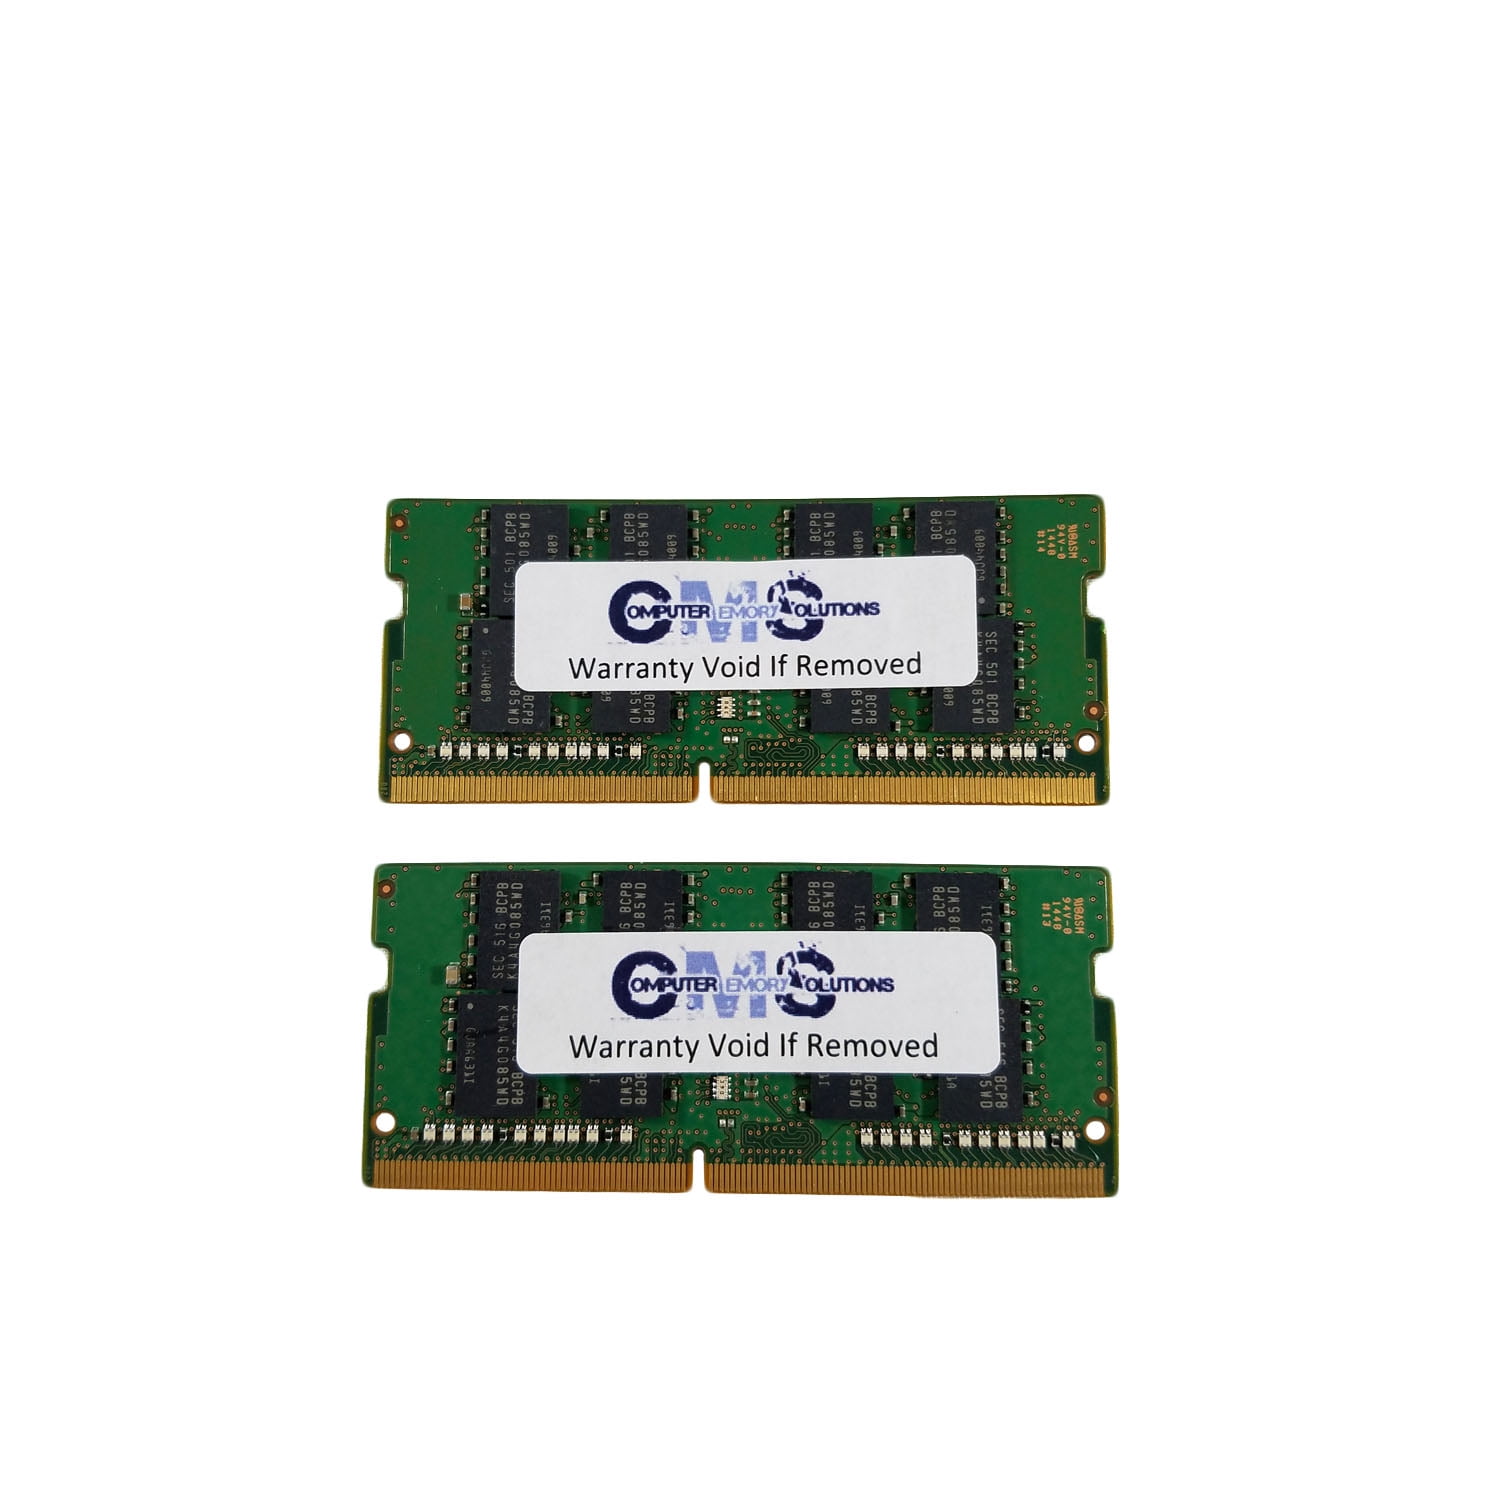 CMS 32GB (2X16GB) DDR4 19200 2400MHZ NON ECC SODIMM Memory Ram Upgrade  Compatible with Dell® Inspiron 15 (7577) Gaming, Inspiron 17 (7778),  Inspiron 